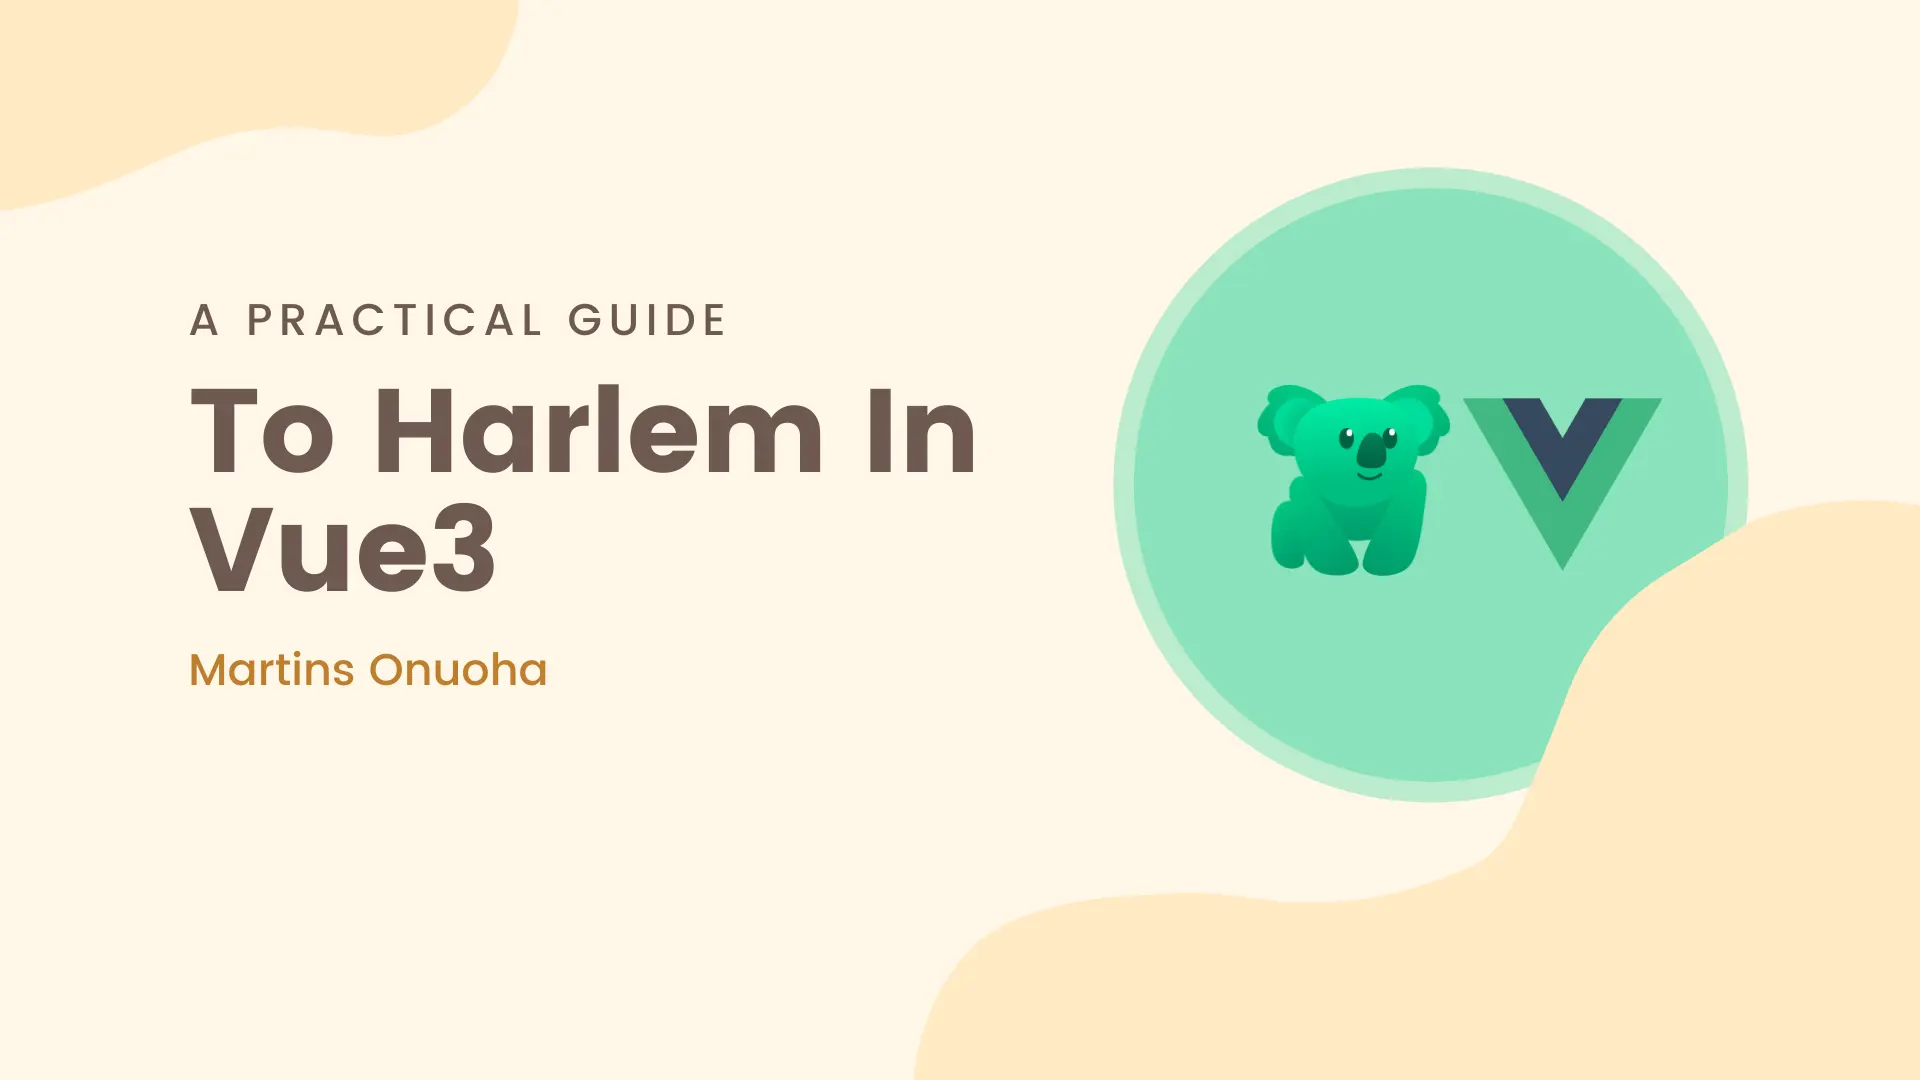 A Practical Guide to Harlem in Vue 3